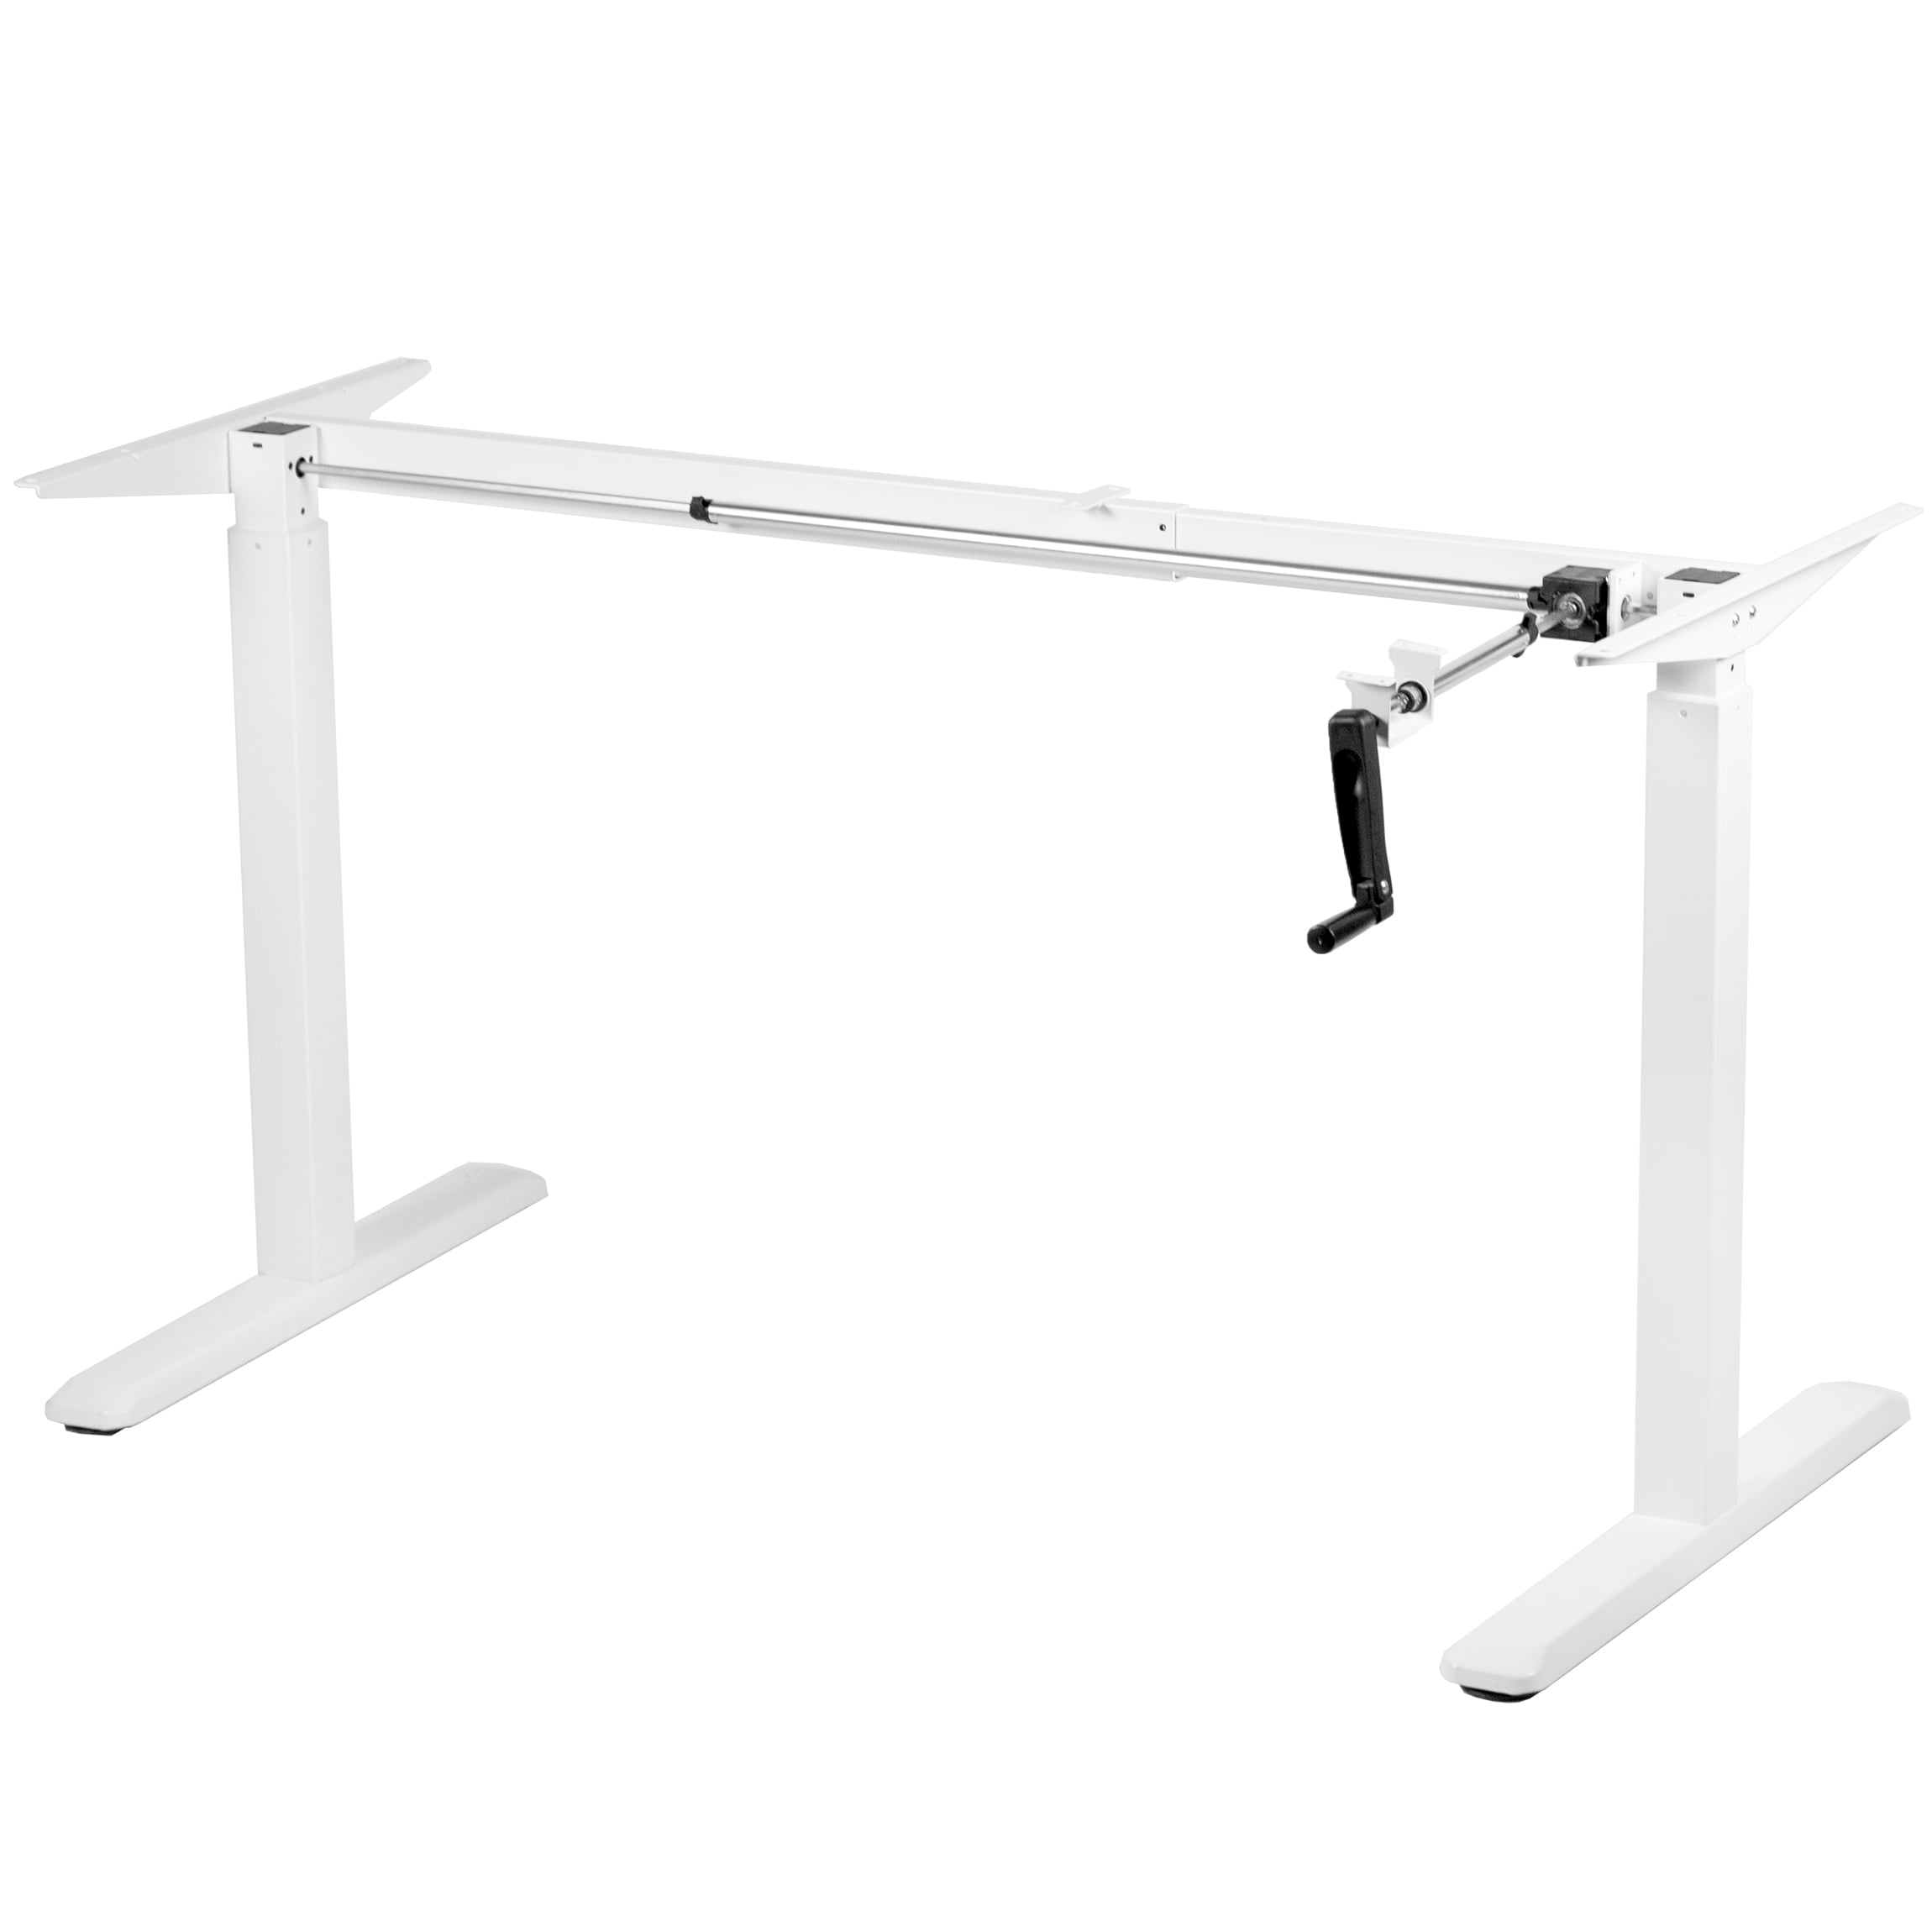 Manual Adjustable Height Standing Desk Frame Sit Stand Desk Frame Ergonomic Standing Workstation with Manual Crank Handle 